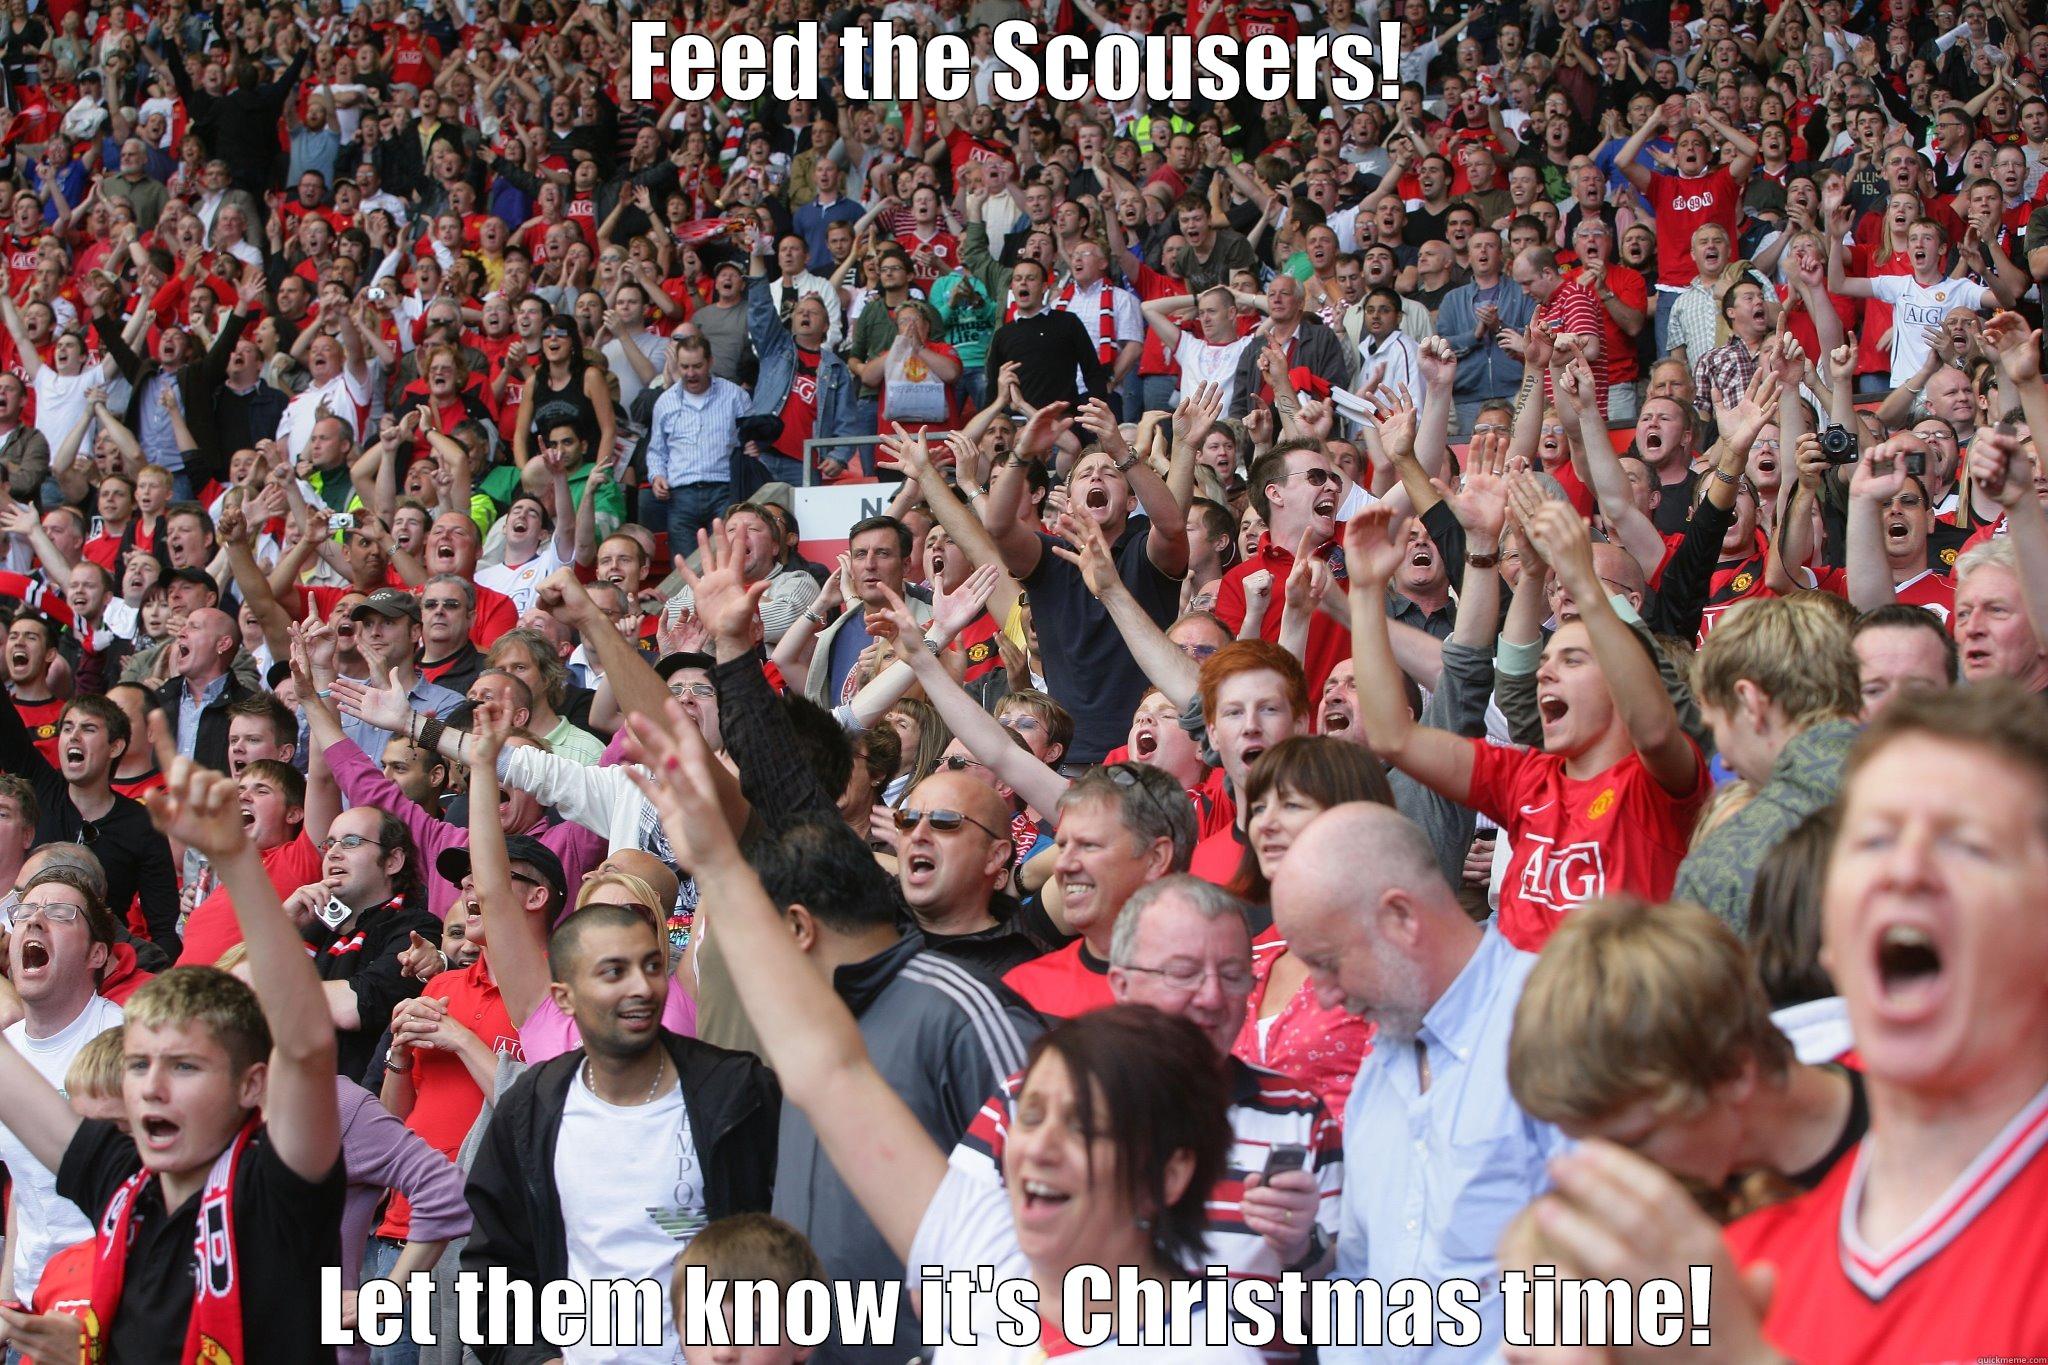 FEED THE SCOUSERS! LET THEM KNOW IT'S CHRISTMAS TIME! Misc